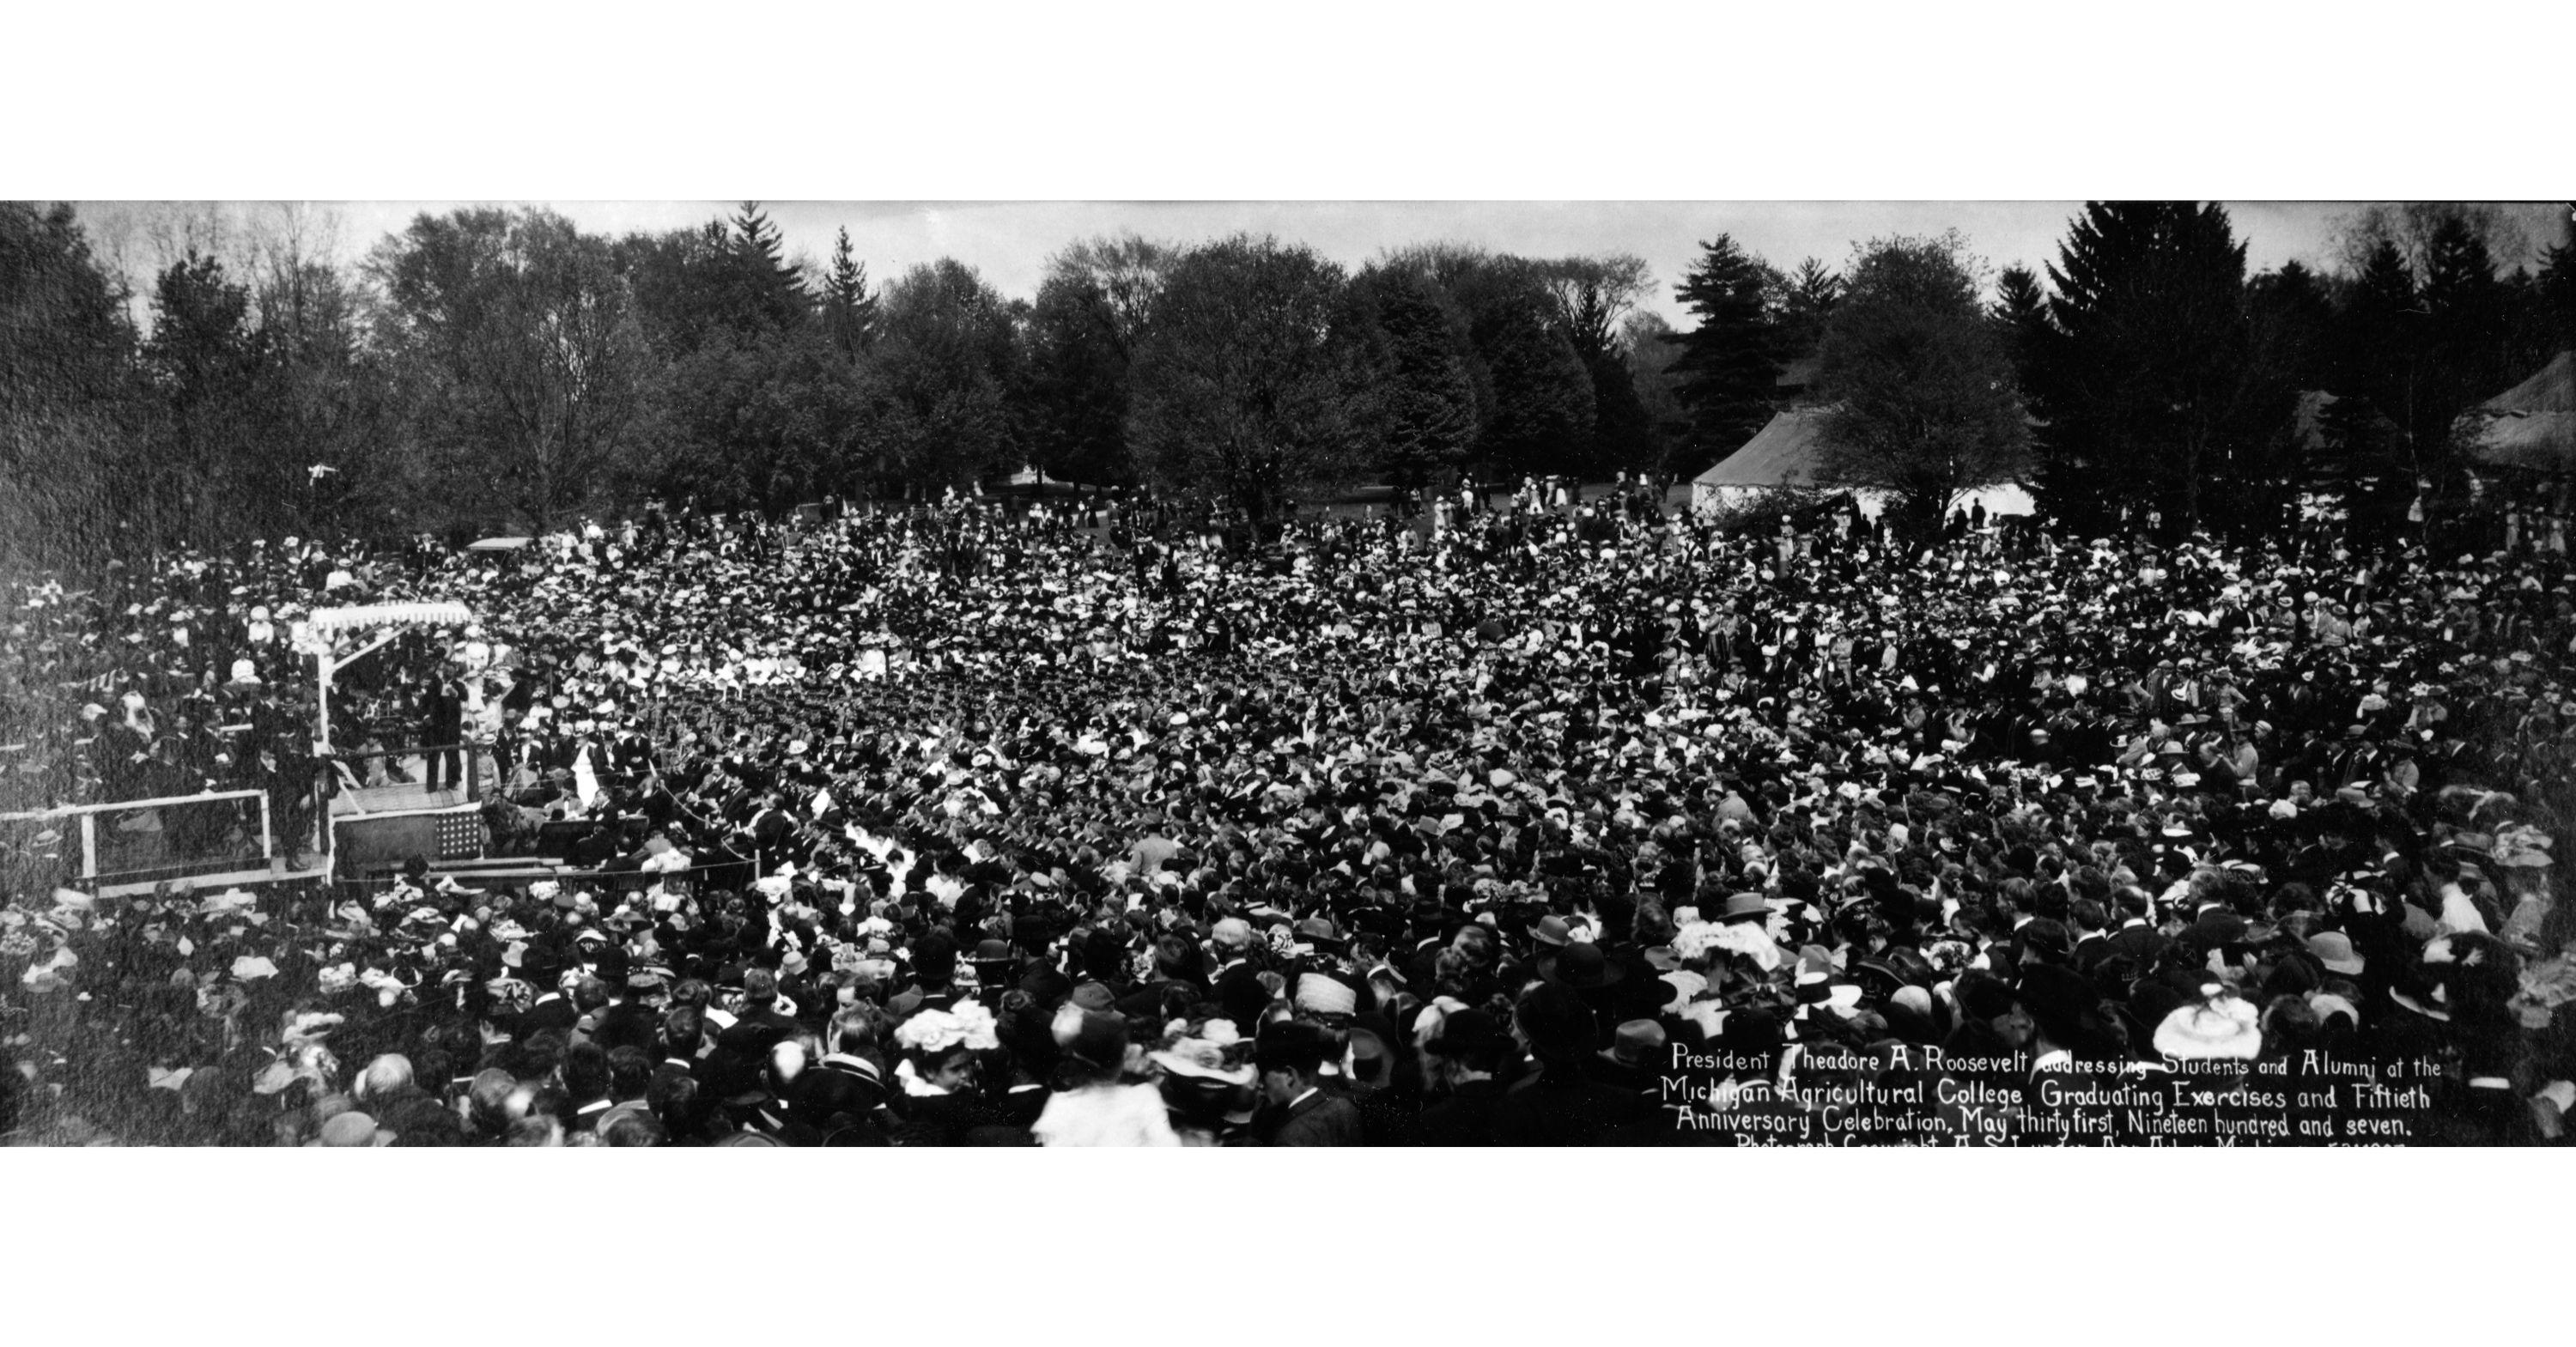 US President Theodore Roosevelt delivers a speech the MSU commencement on May 31, 1907 amid the crowd of people.